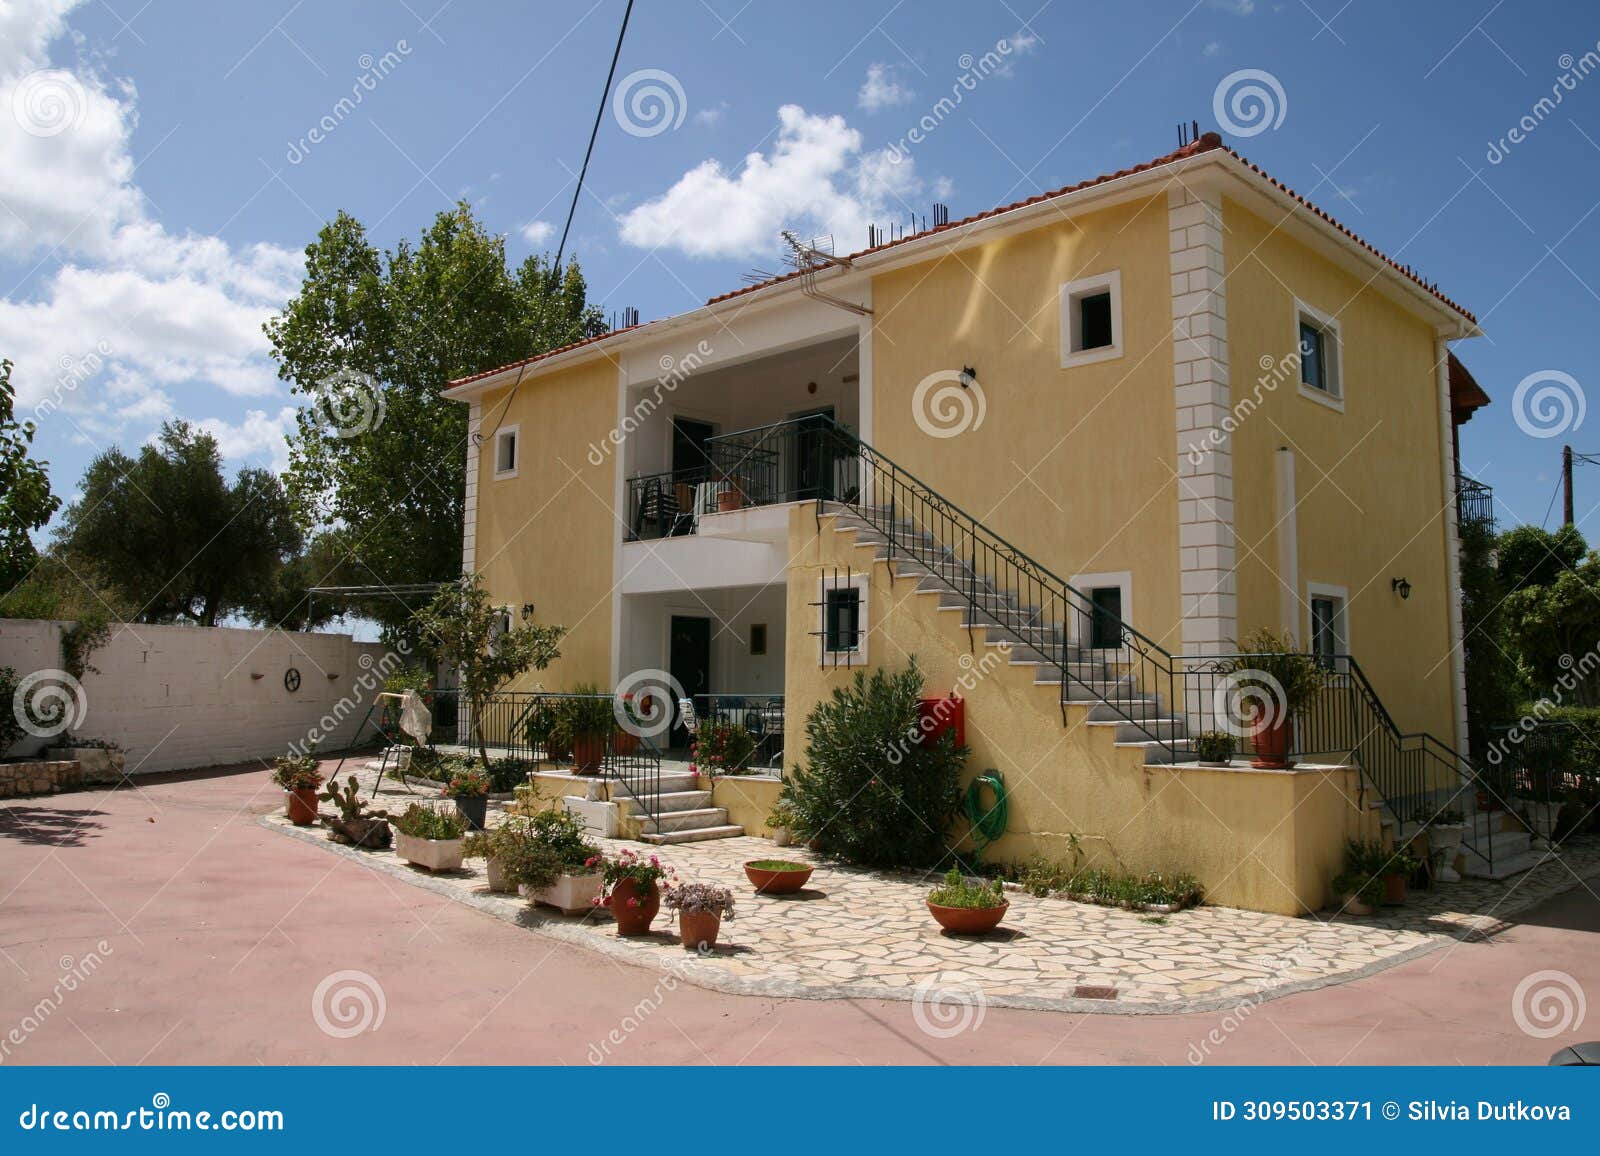 yellow greek villa, accomodation and appartments for tourists, kefalonia, greece